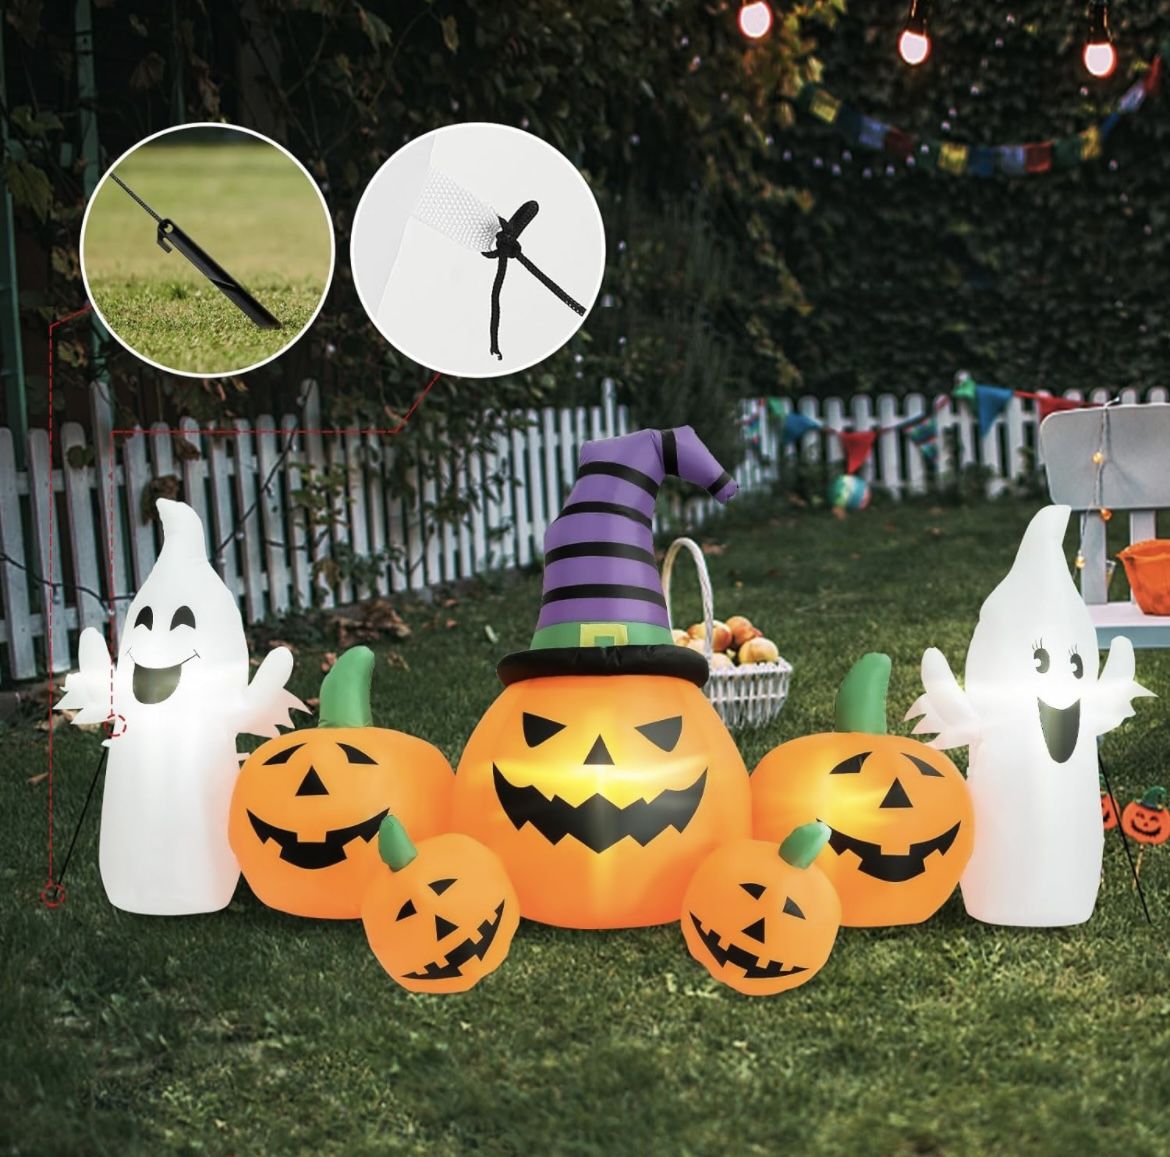 9 FT Inflatable Halloween Decoration -Blow Up LED Lights Halloween Pumpkin and Ghost Combo with LED Lights Halloween Decorations for Outdoor Yard Gard